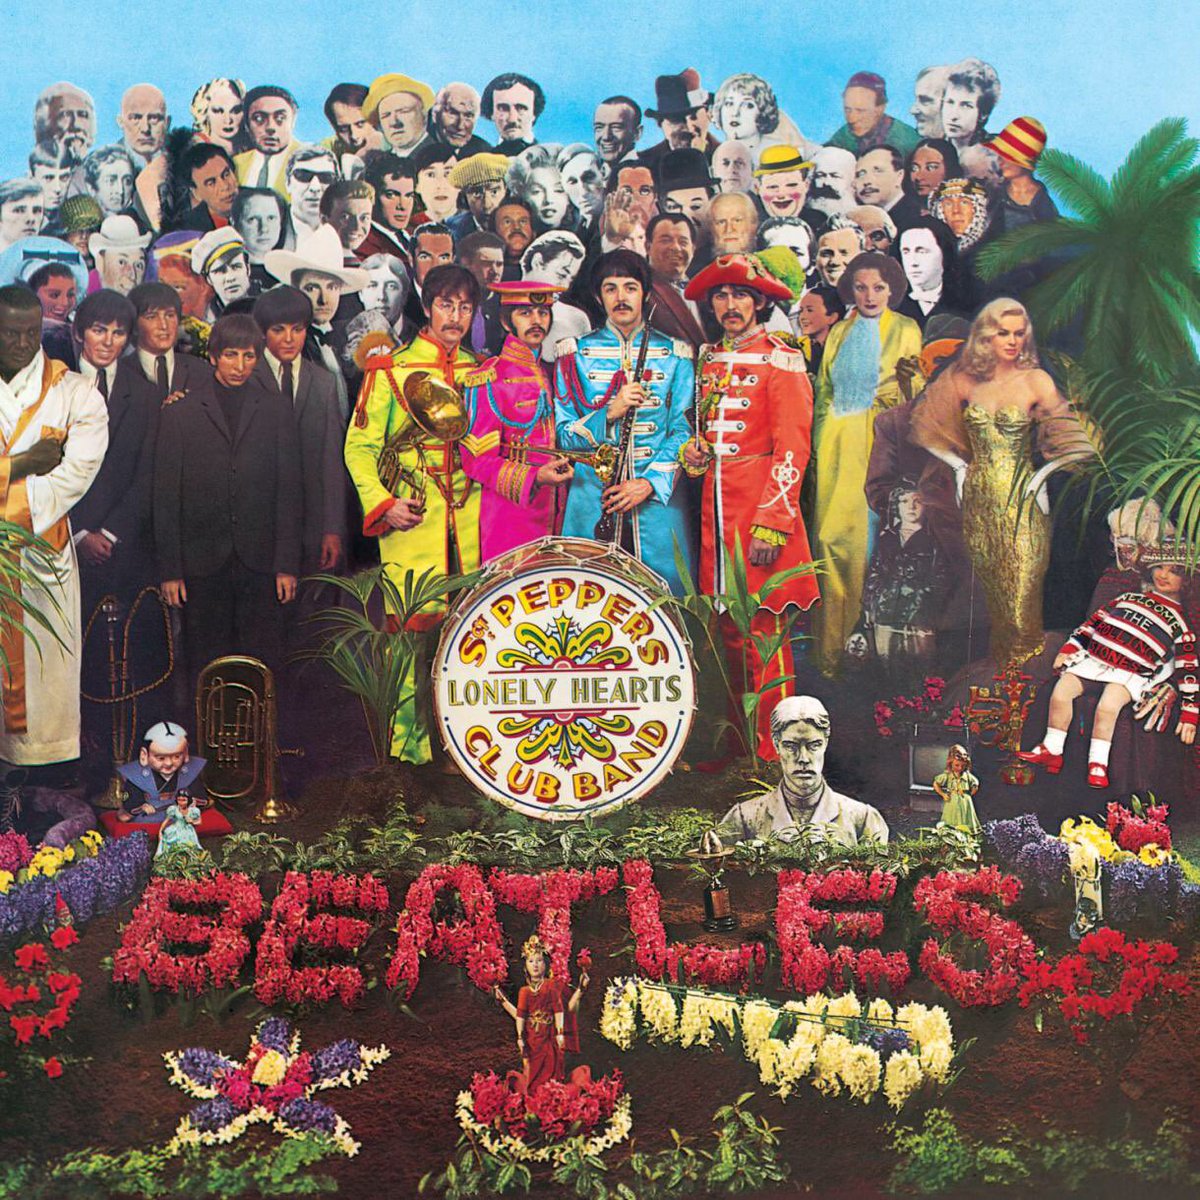 78. The Beatles - Sgt. Pepper's Lonely Hearts Club Band (1967)Genres: Psychedelic Pop, Pop RockRating: ★★★ 10/14 2018Note: This album didn’t grow on me much at all. A few of the best tracks in their discography are on Sgt Pepper’s, but it’s such a mess of a record.